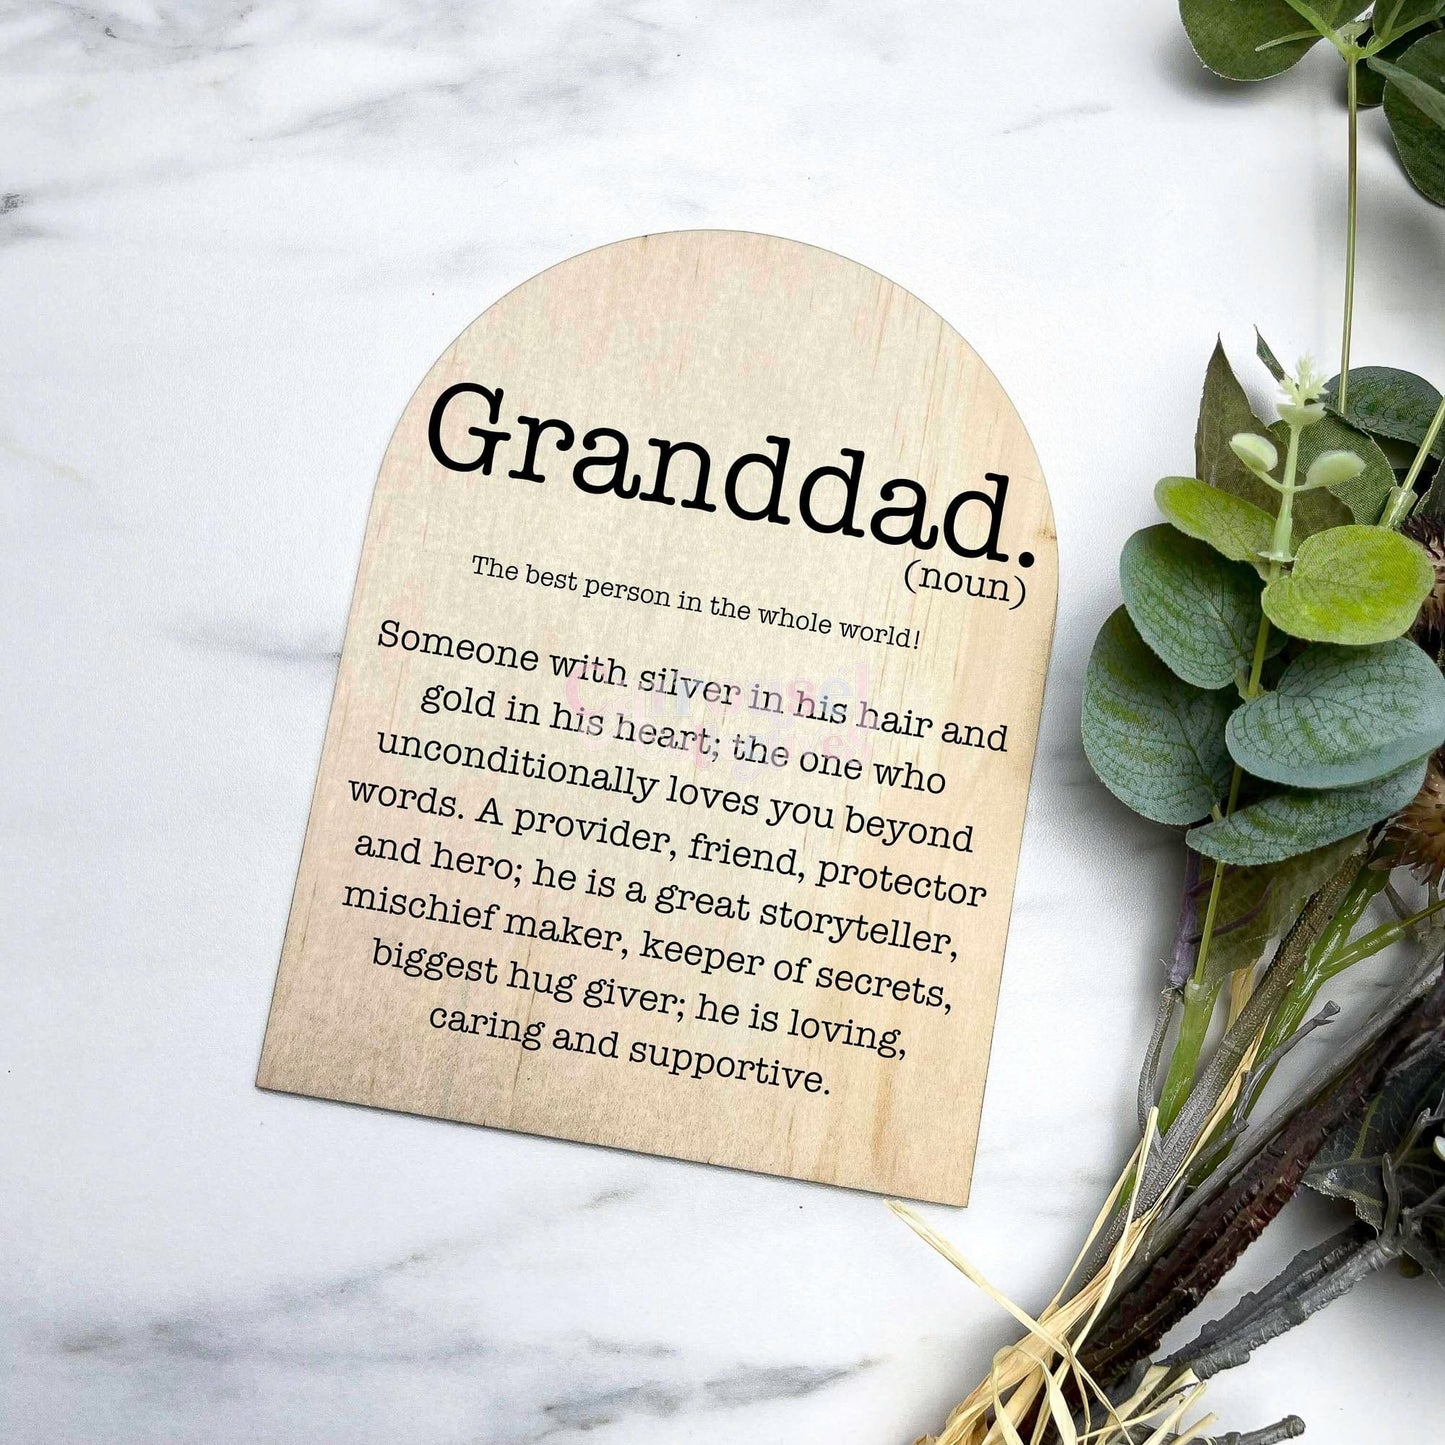 Granddad Definition Sign, Fathers day gifts, printed fathers day signs, Gifts for dad s8